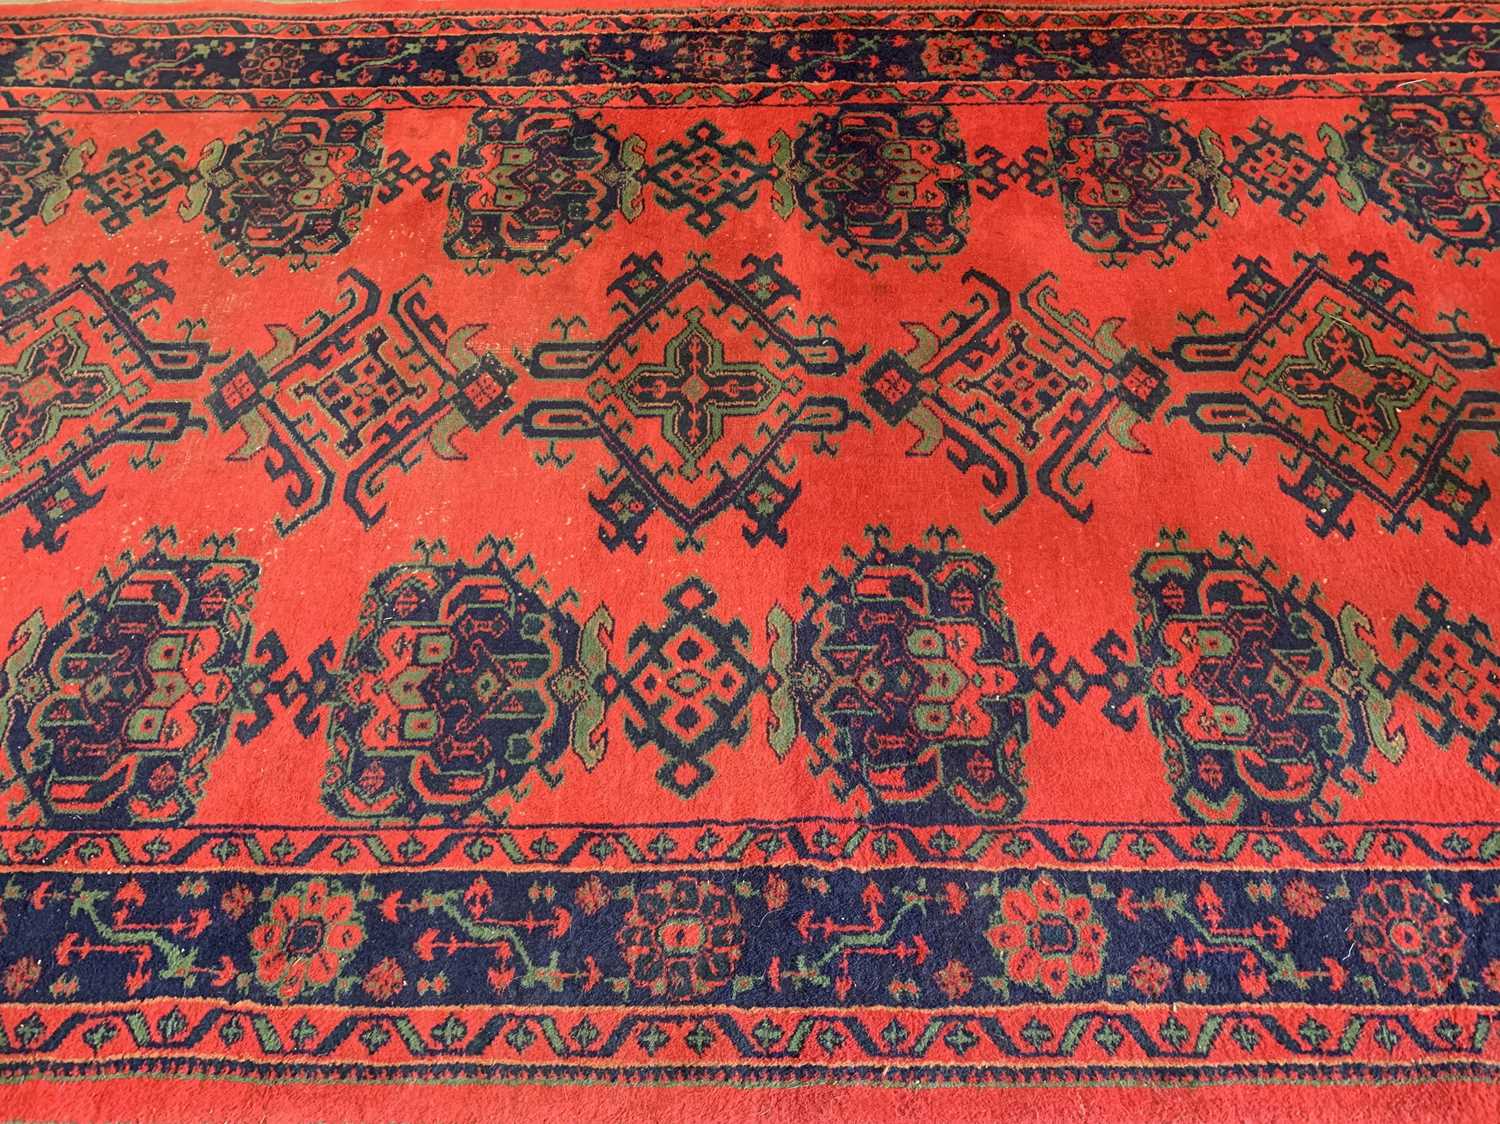 EASTERN STYLE WOOLLEN RUG, red and blue ground with repeating central pattern, 370 x 202cms - Image 2 of 3